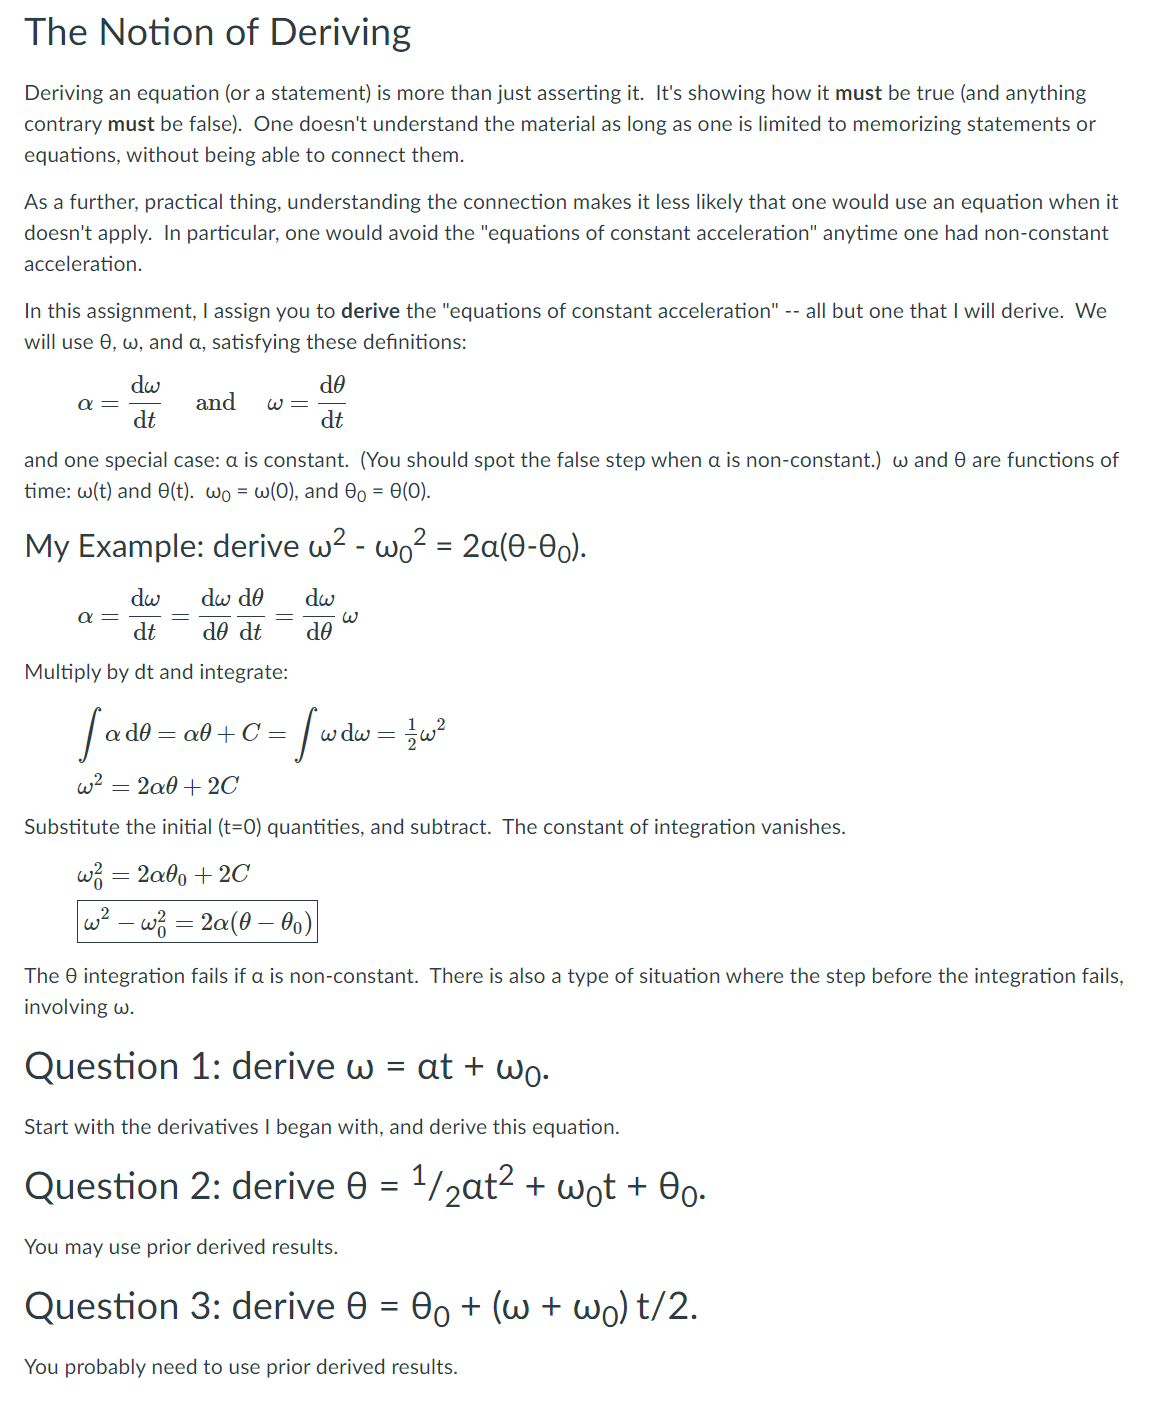 The Notion of Deriving
Deriving an equation (or a statement) is more than just asserting it. It's showing how it must be true (and anything
contrary must be false). One doesn't understand the material as long as one is limited to memorizing statements or
equations, without being able to connect them.
As a further, practical thing, understanding the connection makes it less likely that one would use an equation when it
doesn't apply. In particular, one would avoid the "equations of constant acceleration" anytime one had non-constant
acceleration.
In this assignment, I assign you to derive the "equations of constant acceleration" -- all but one that I will derive. We
will use 0, w, and a, satisfying these defınitions:
dw
and
OP
α
W =
dt
dt
and one special case: a is constant. (You should spot the false step when a is non-constant.) w and 0 are functions of
time: w(t) and O(t). wo = w(0), and 00 = 0(0).
My Example: derive w2 - wo² = 2a(0-0).
dw
dw do
dw
a =
dt
de dt
de
Multiply by dt and integrate:
OP
a0 + C =
dw =
w2
= 2a0 + 2C
Substitute the initial (t=0) quantities, and subtract. The constant of integration vanishes.
w3 = 2a6, + 2C
w? - wz = 2a(0 – 0o)
The 0 integration fails if a is non-constant. There is also a type of situation where the step before the integration fails,
involving w.
Question 1: derive w = at + wo-
Start with the derivatives I began with, and derive this equation.
Question 2: derive 0 = 1/2at2 + wot + 0o-
%D
You may use prior derived results.
Question 3: derive 0
Oo + (w + wo) t/2.
You probably need to use prior derived results.
